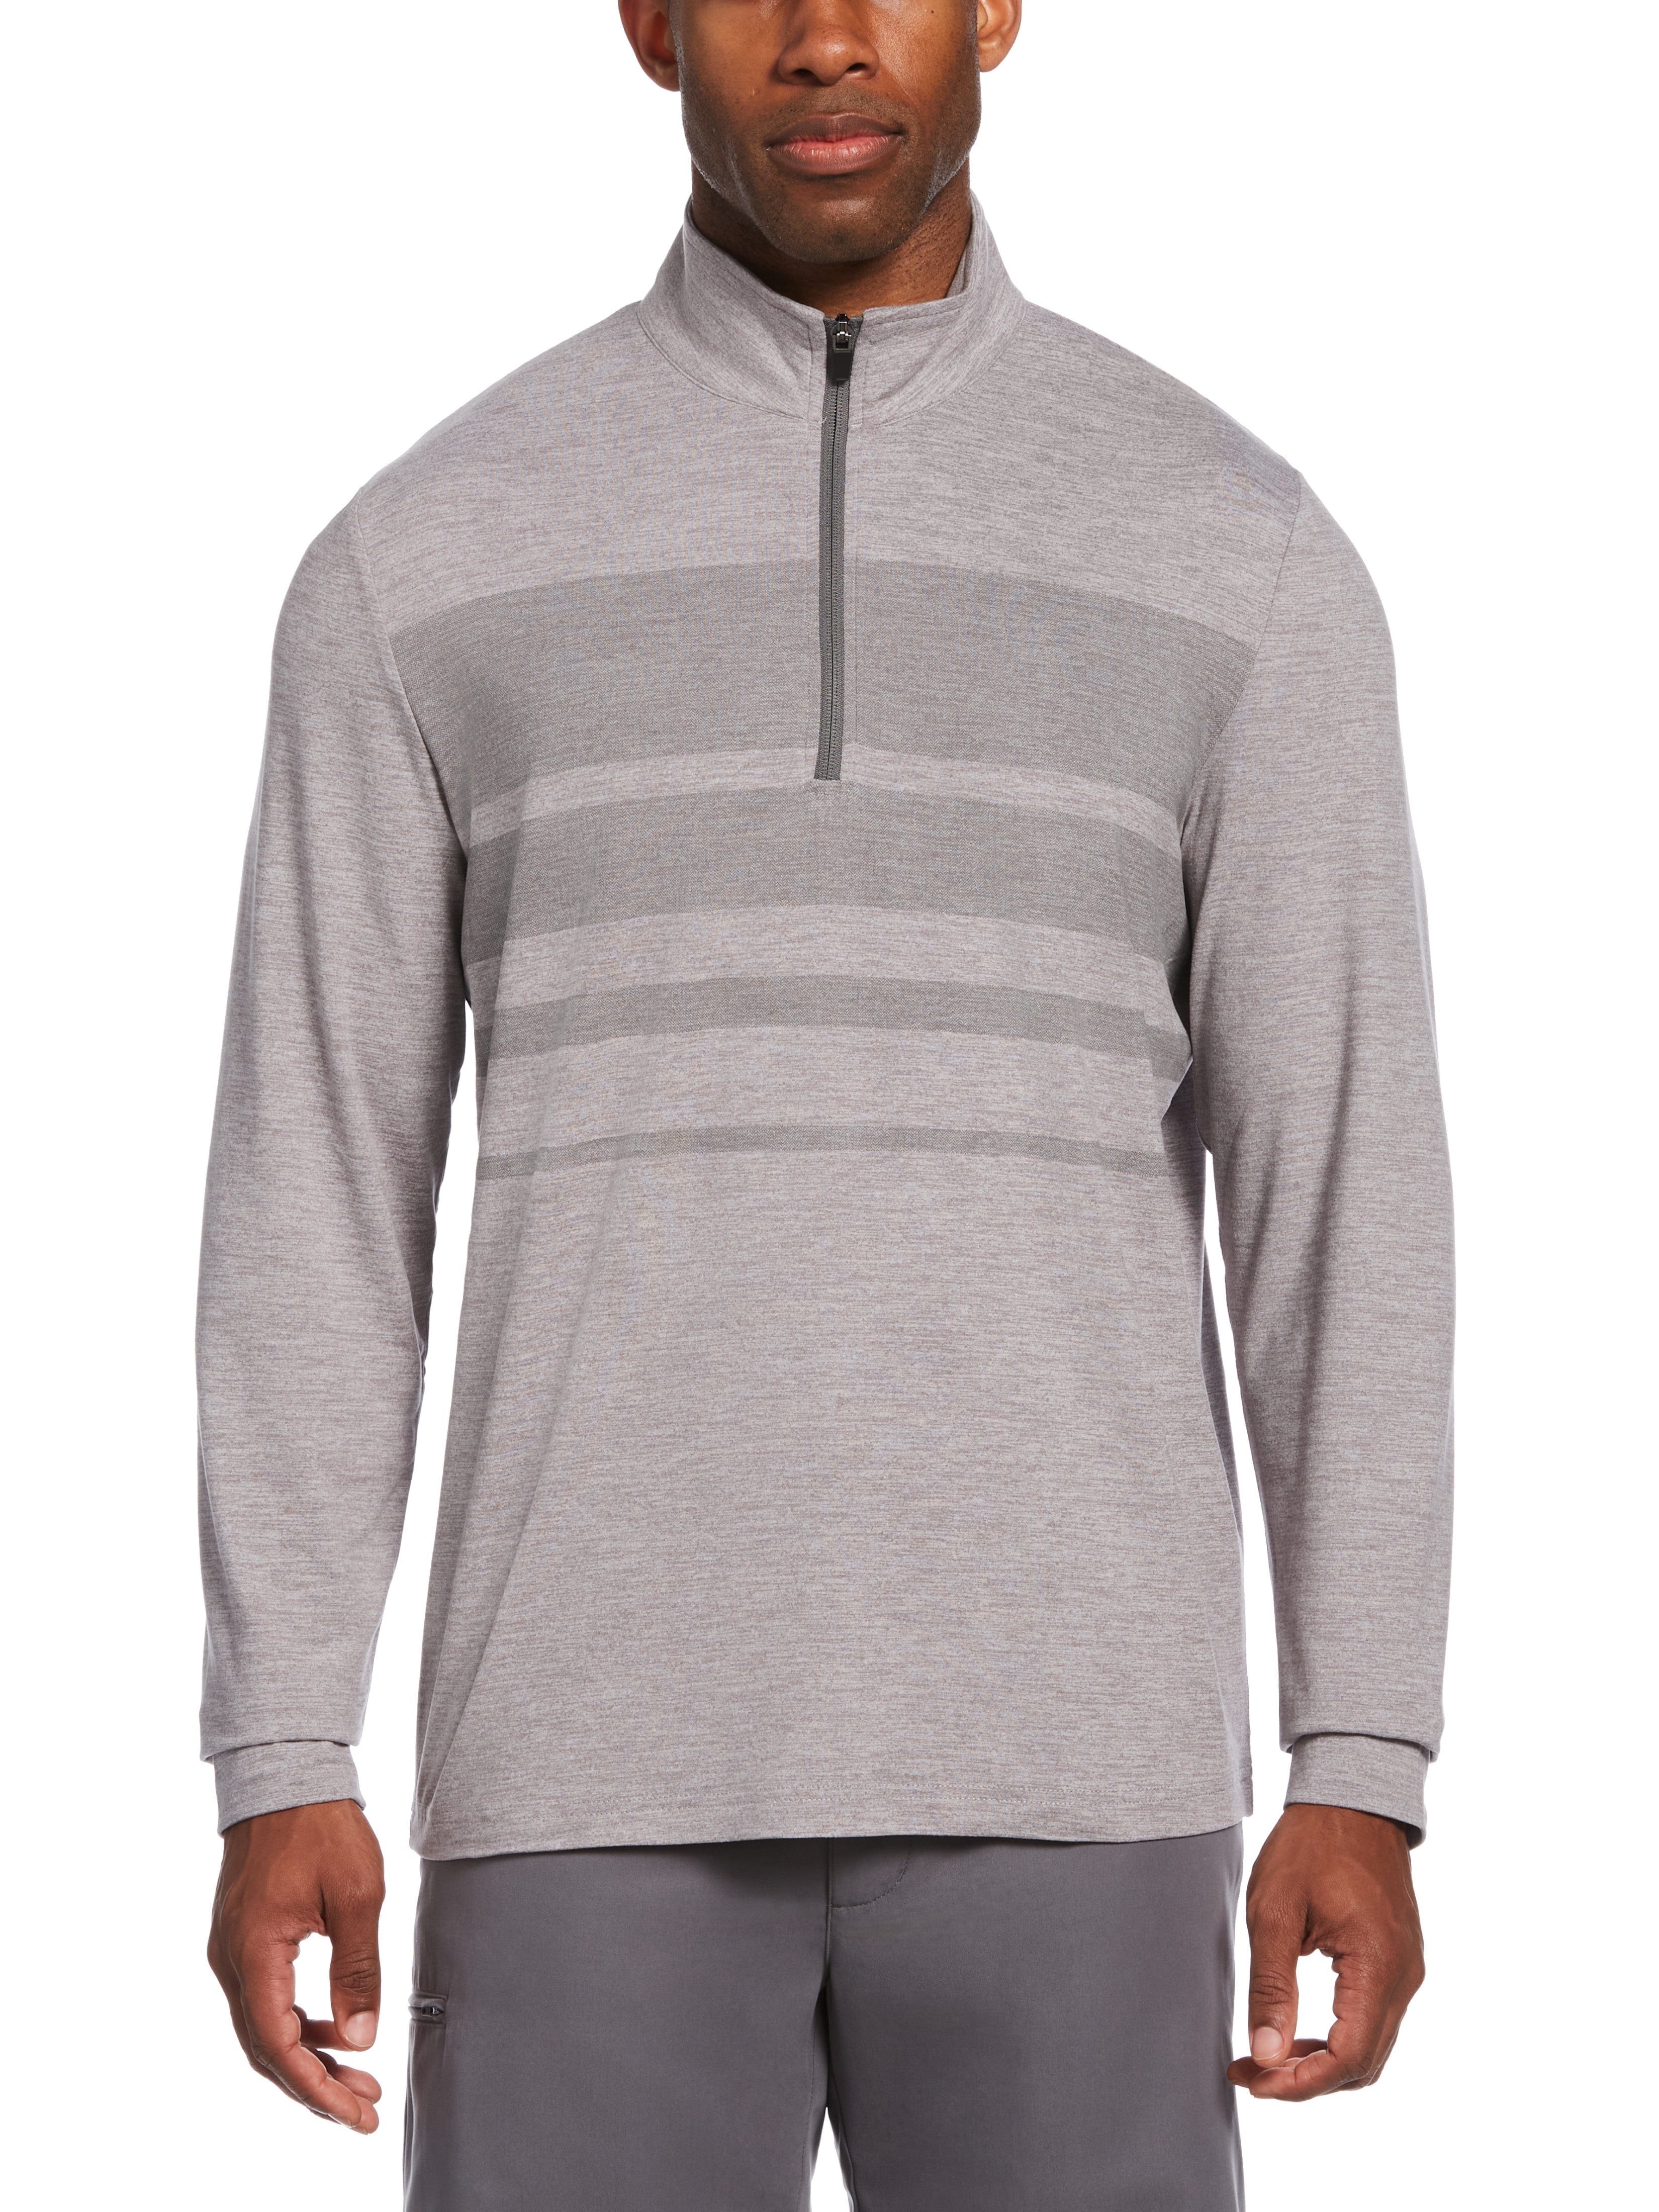 PGA TOUR Apparel Mens Luxury Performance Stretch 1/4 Zip Golf Pullover Top, Size Large, Light Grey Heather Gray, Polyester/Elastane